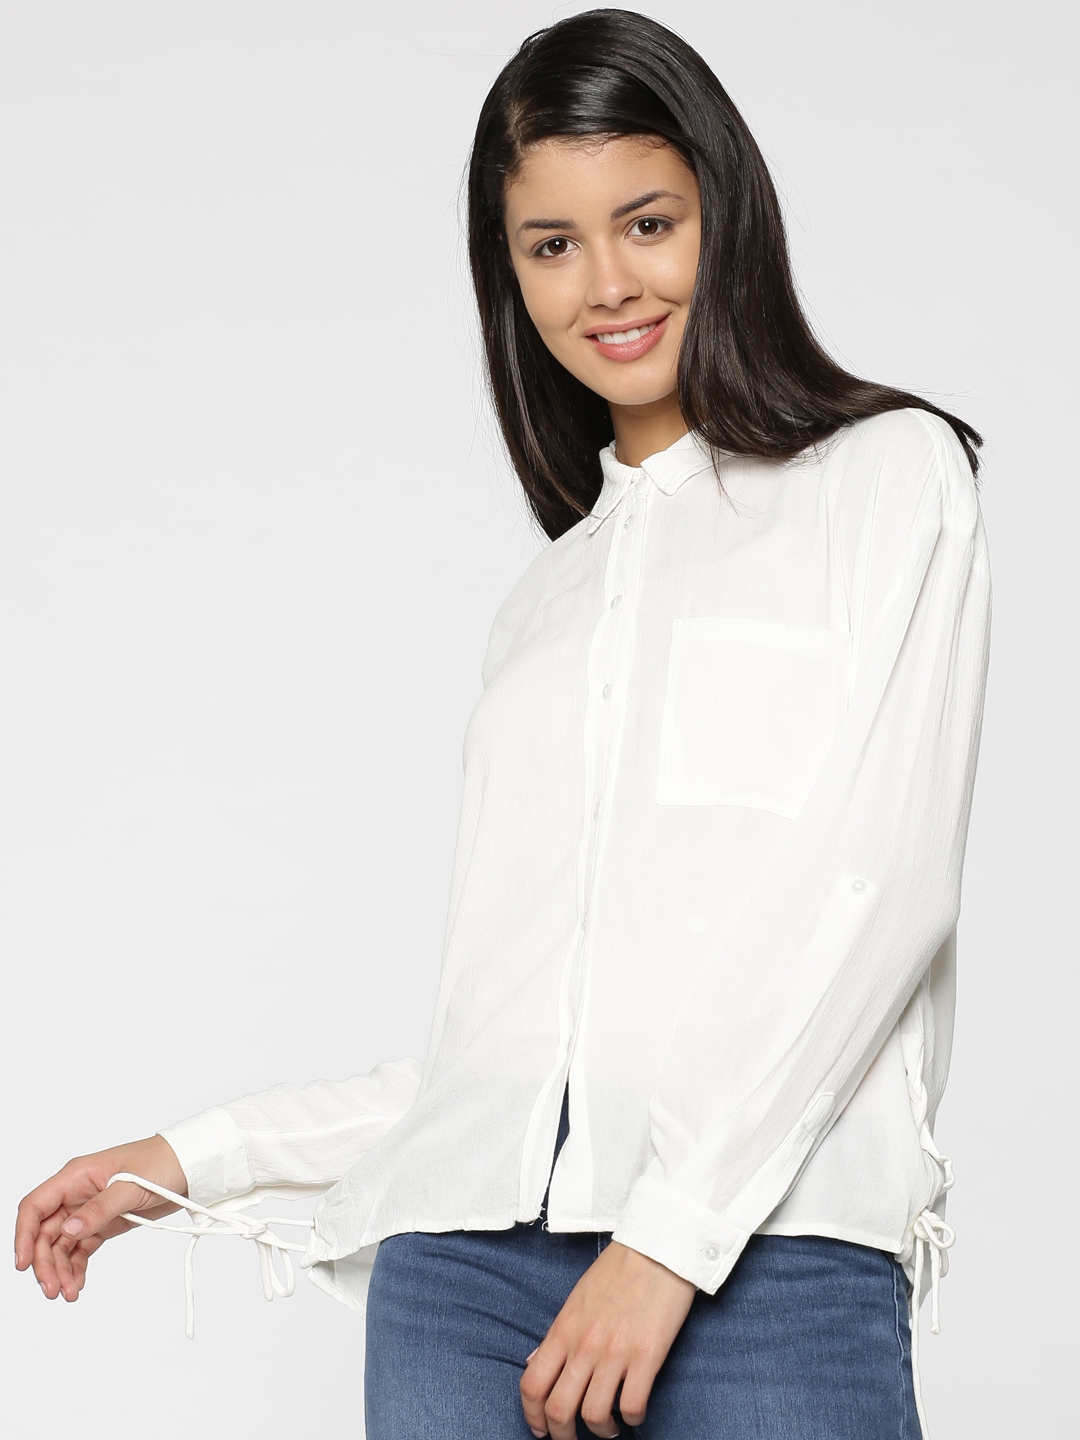 Buy Only Women White Regular Fit Solid Casual Shirt Shirts For Women